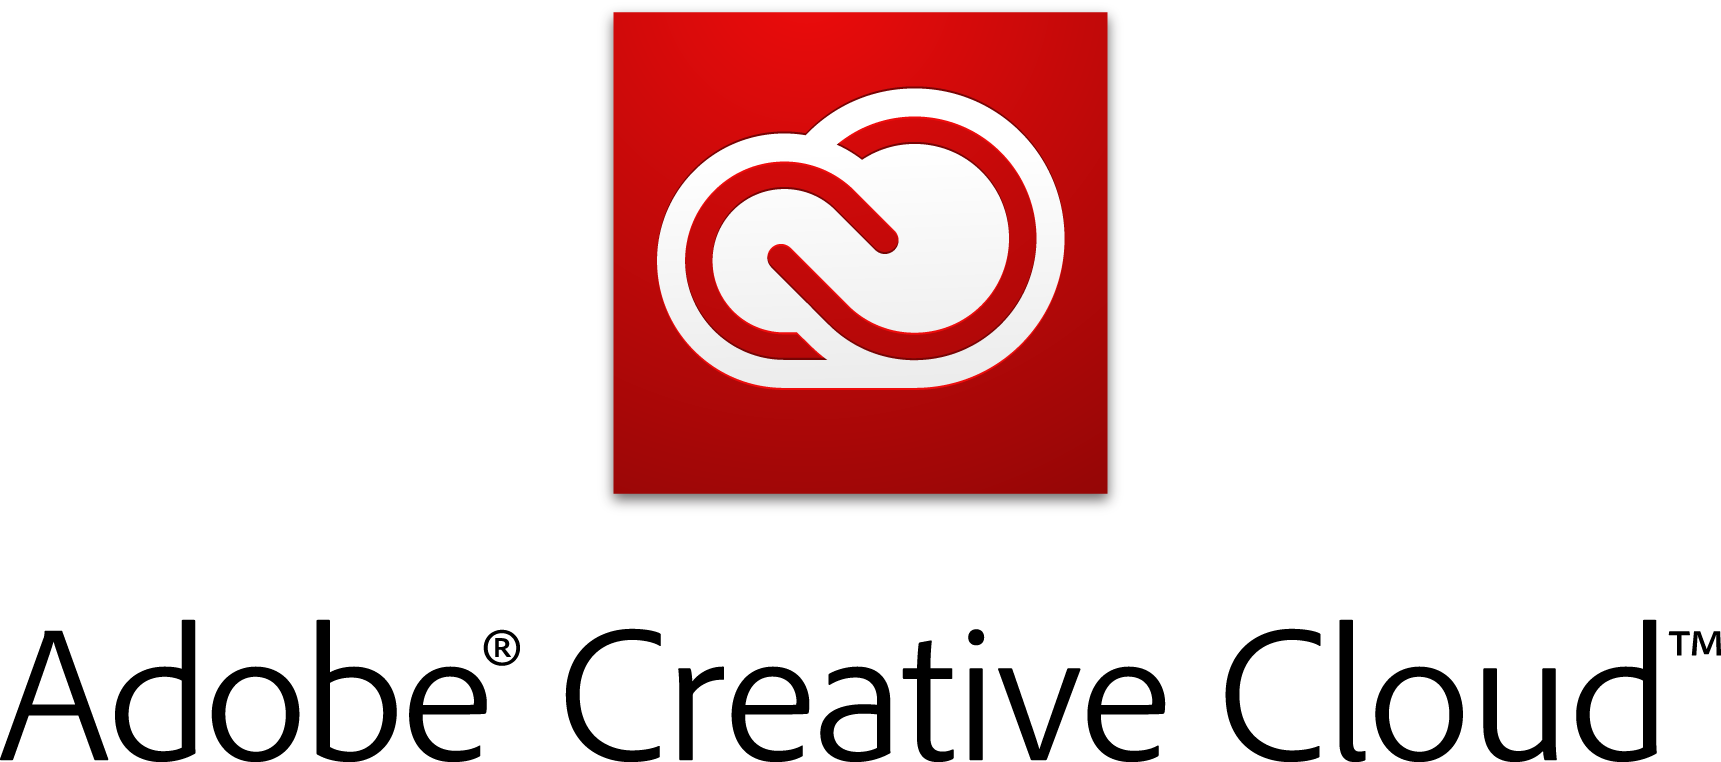 Security flaw on Adobe Creative Cloud, exposed user data